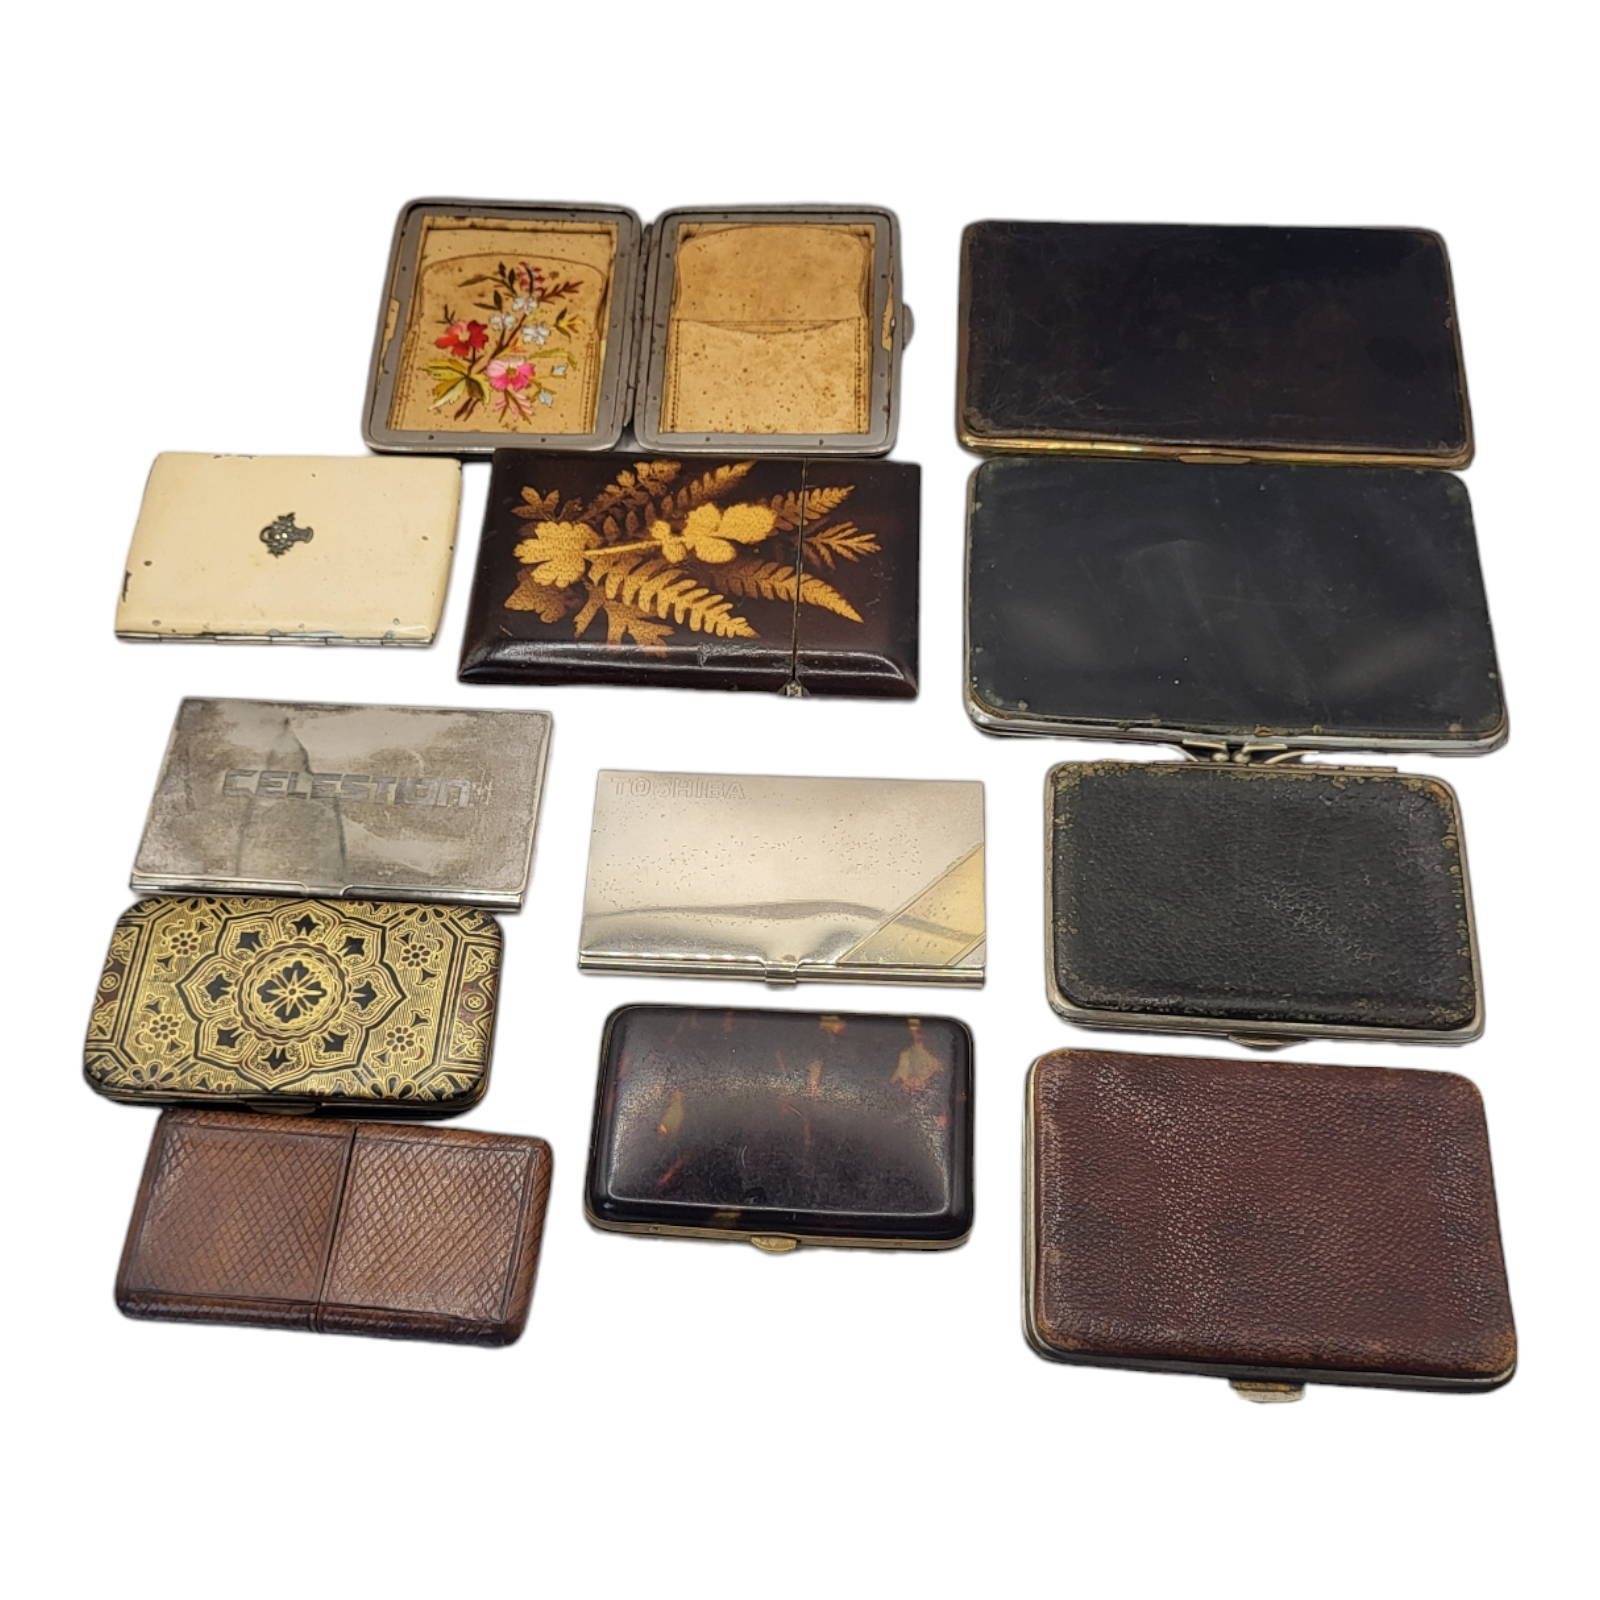 A COLLECTION OF SEVEN EARLY 20TH CENTURY LADIES’ LEATHER BOUND CARD CASES, CIRCA 1900 - 1920 Three